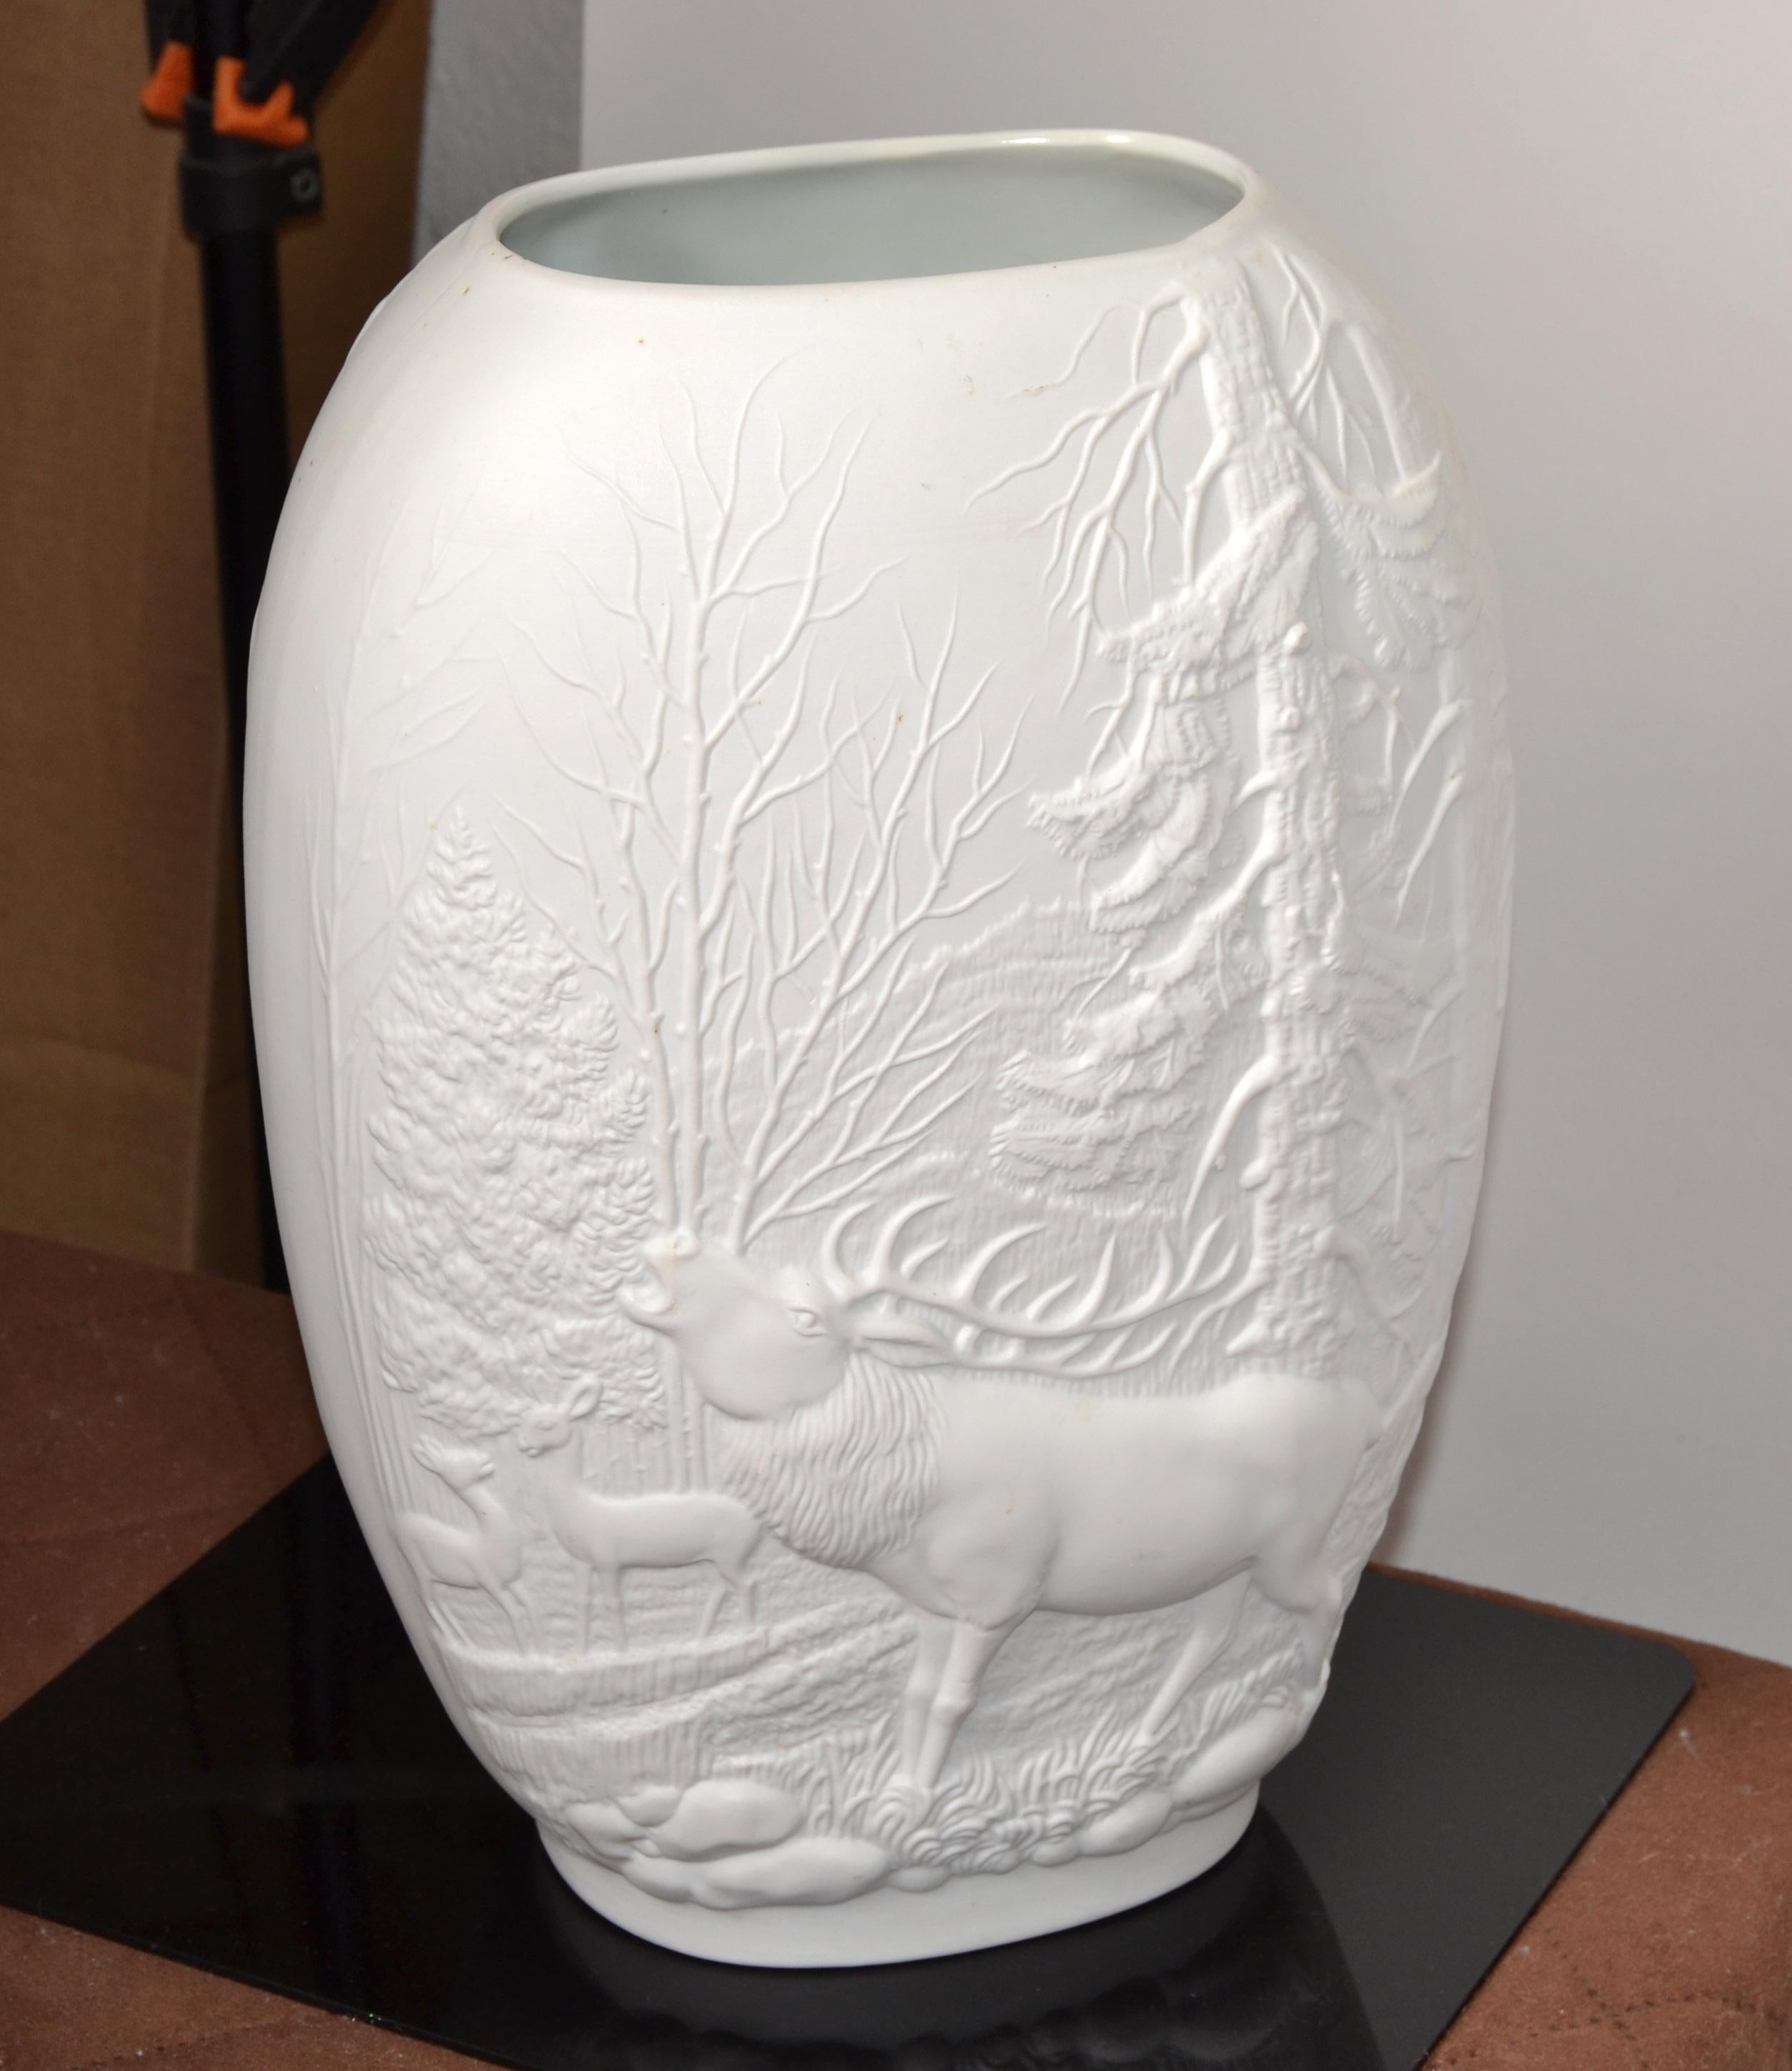 Mid-Century Modern Rosenthal Bavaria white Bisque handmade German Royal Porcelain Op Art Relief Decor Flower Vase.
White bisque porcelain vase with Rustic Forest motif of Deer and Pine Trees adorning this oval vase.
In lovely condition, no chips,